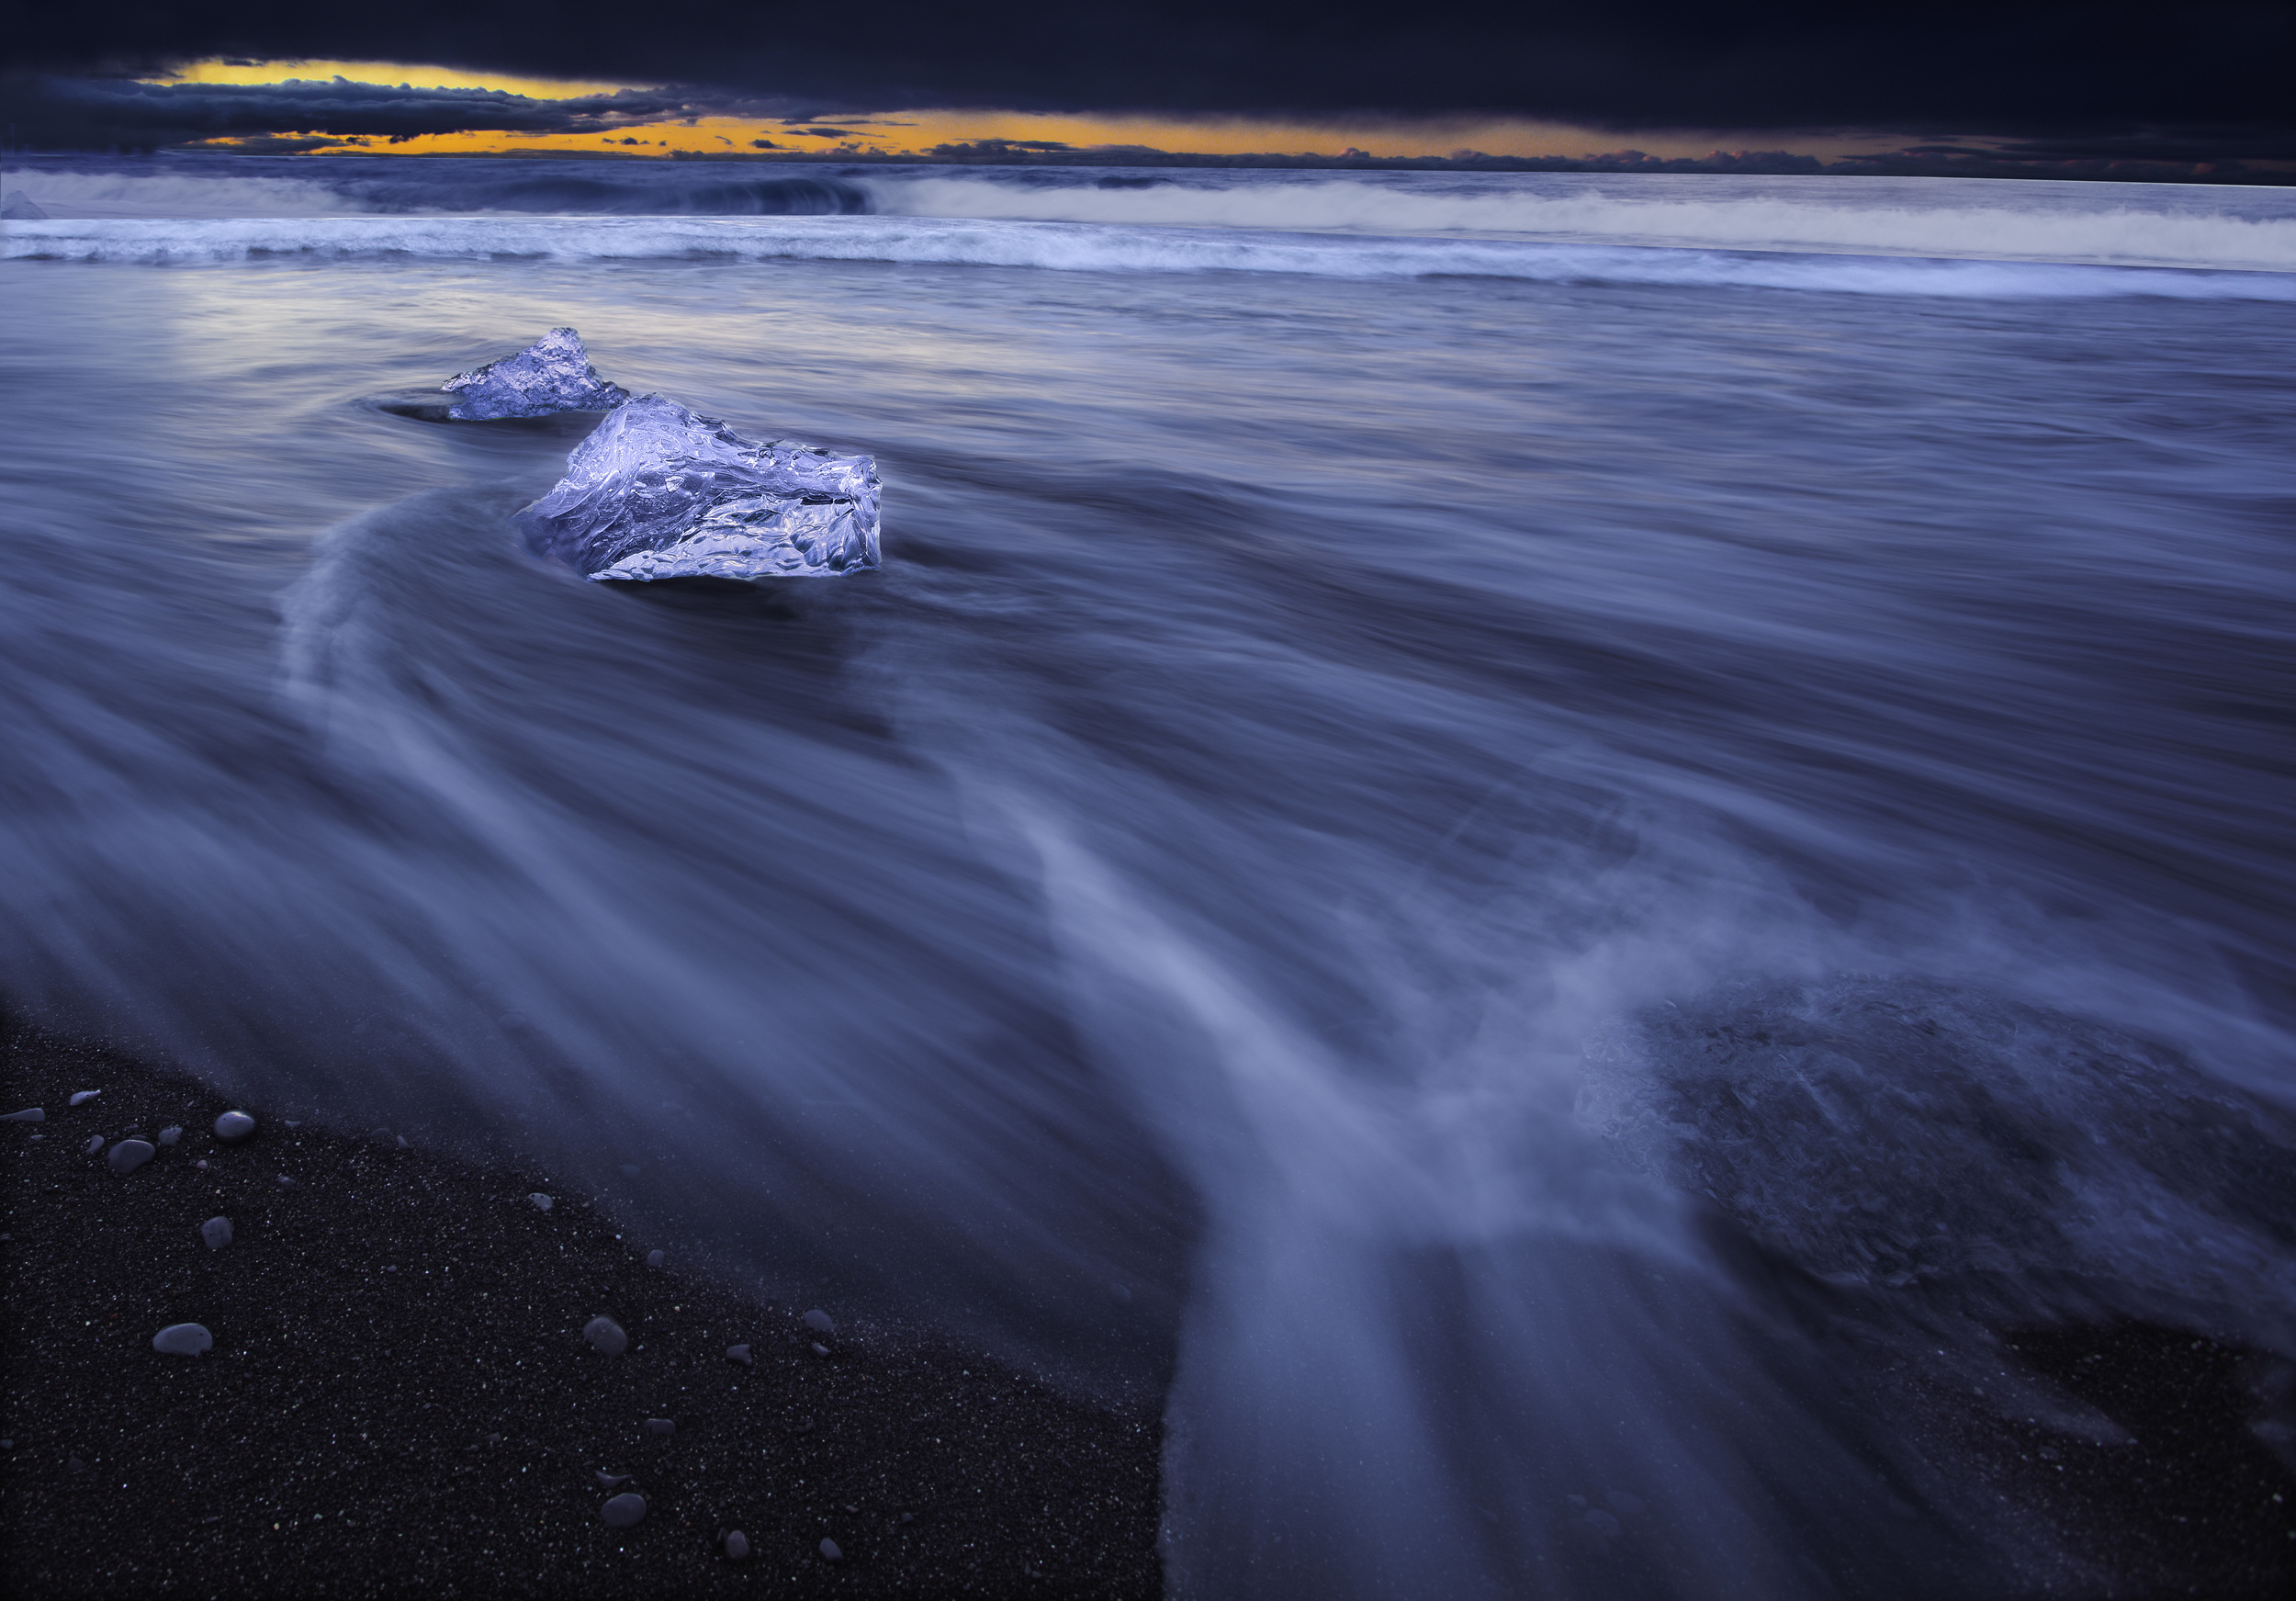   ICELAND.&nbsp;  JOKULSARION ICE BEACH. &nbsp; THE ICE LOOKS LIKE IT IS FLOATING IN THE AIR BECAUSE THE WAVE WAS WASHING AWAY THE SAND BENEATH IT AS I WAS TAKING THE PHOTO. 